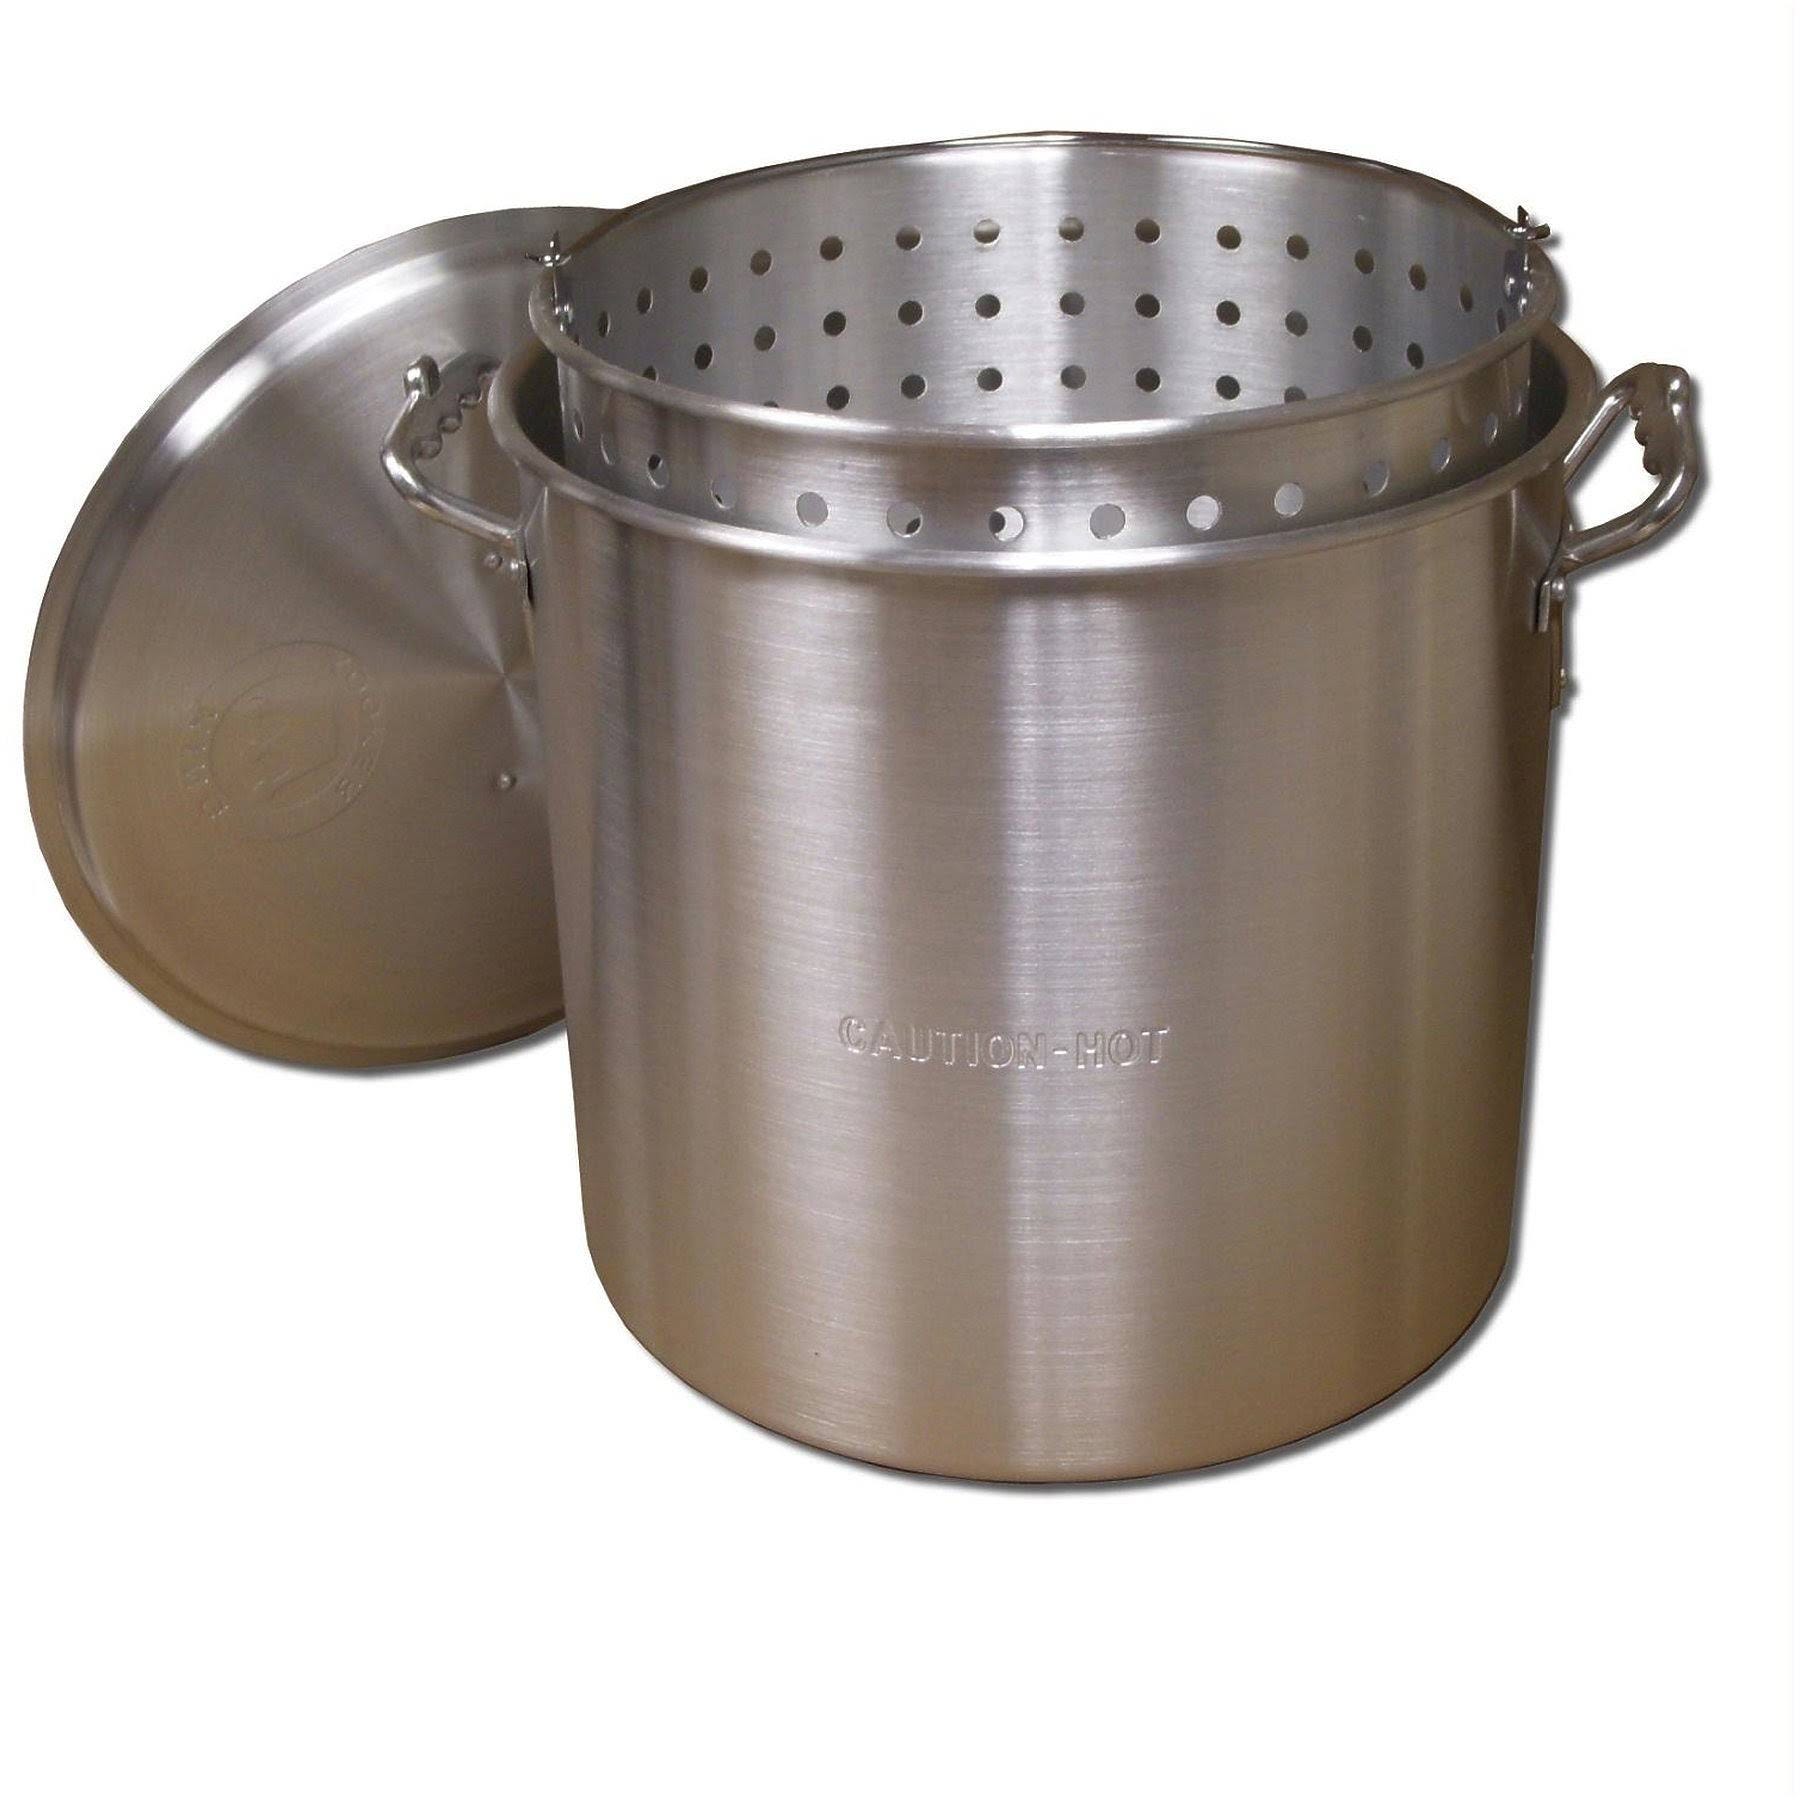 Crawfish Boiler for Large Seafood Feasts | Image